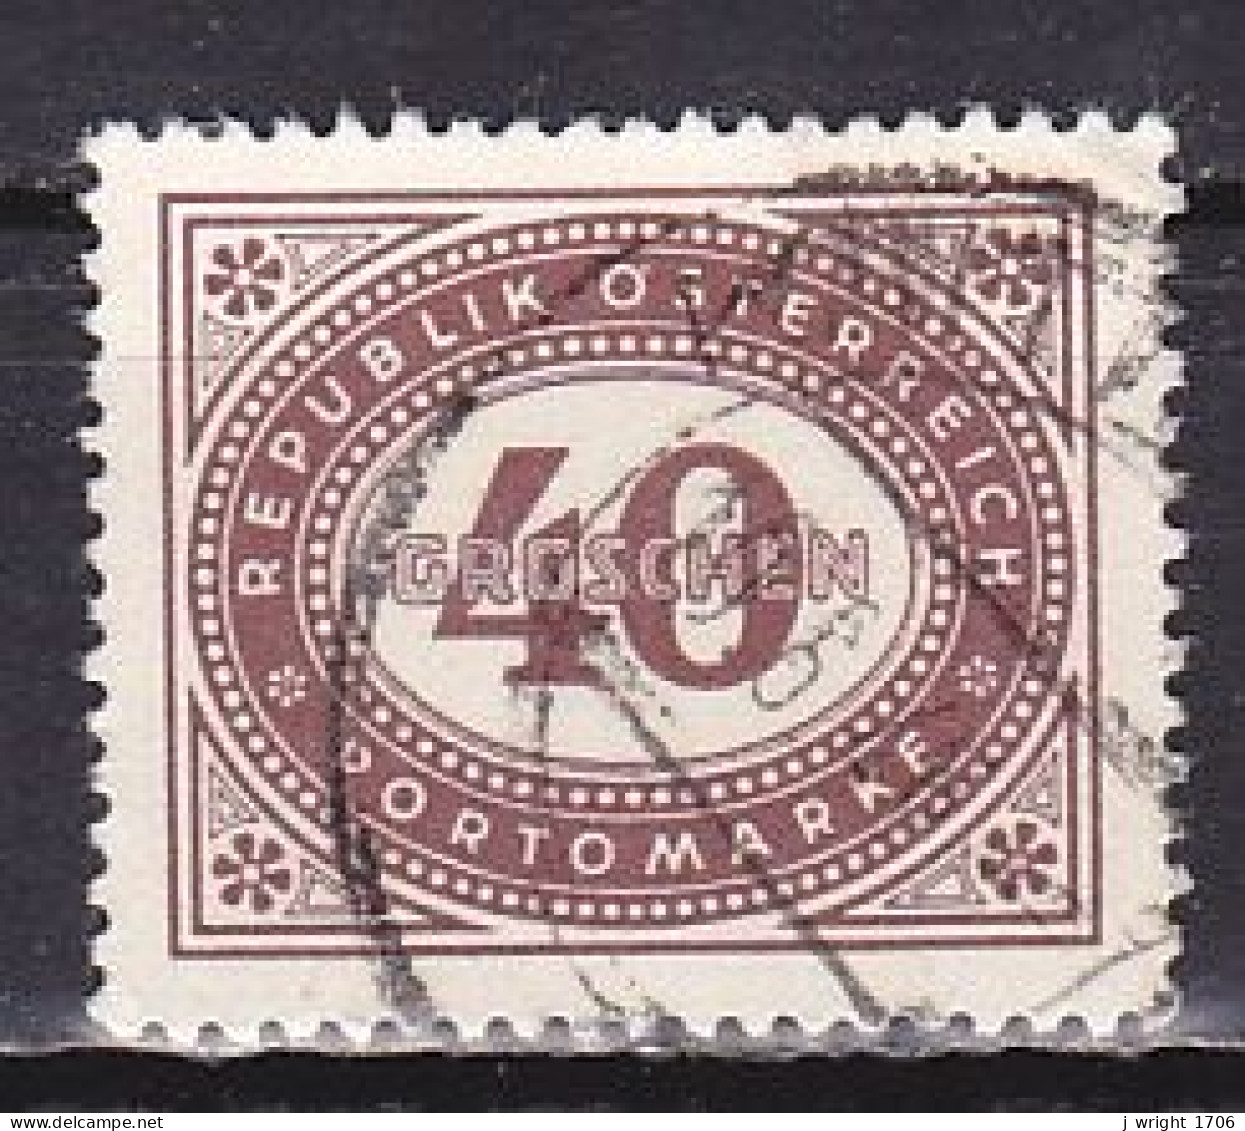 Austria, 1947, Numeral In Oval Frame, 40g, USED - Taxe